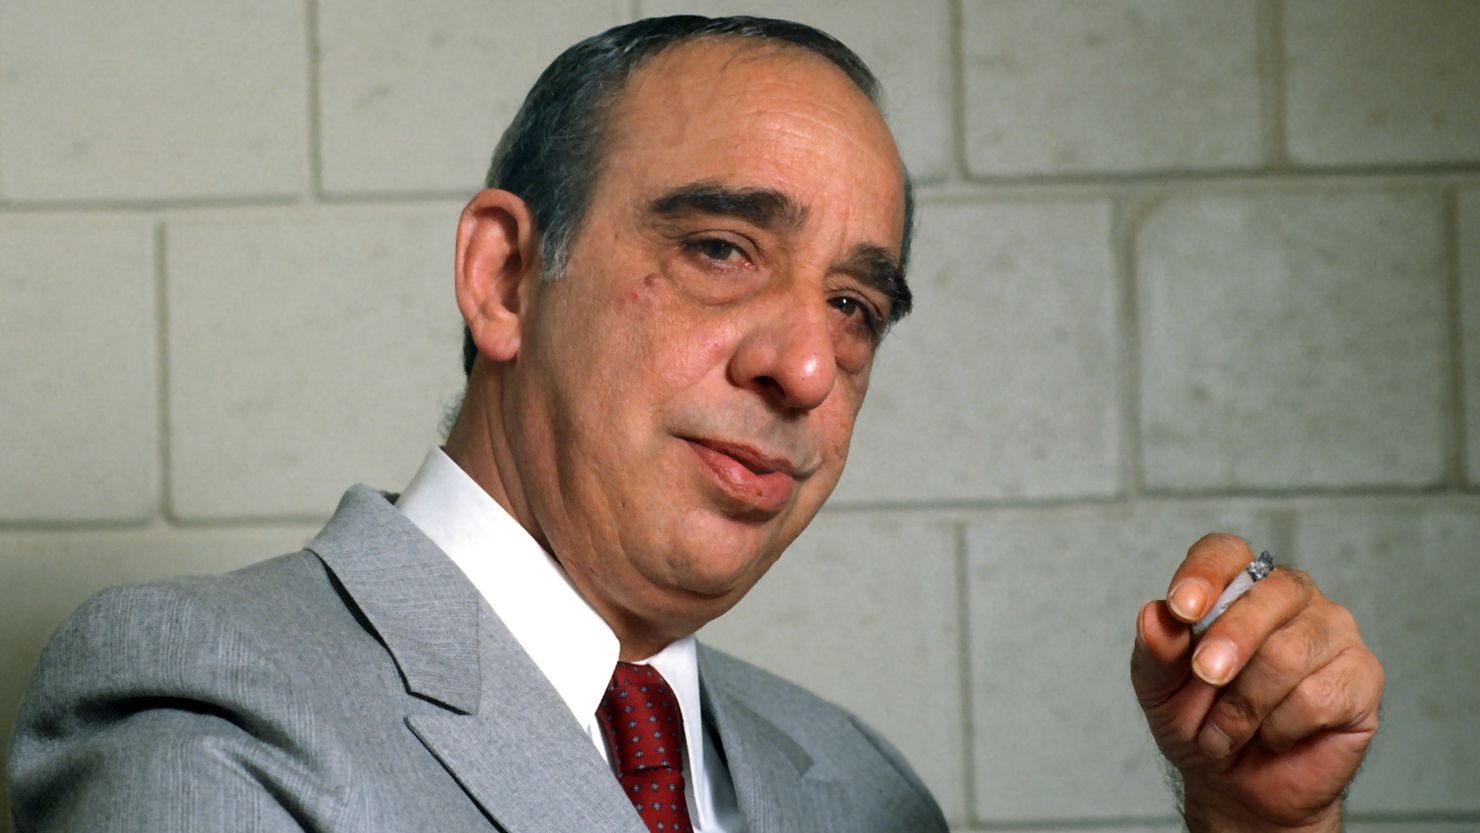 Carmine Persico was also known as "Junior" and "The Snake."